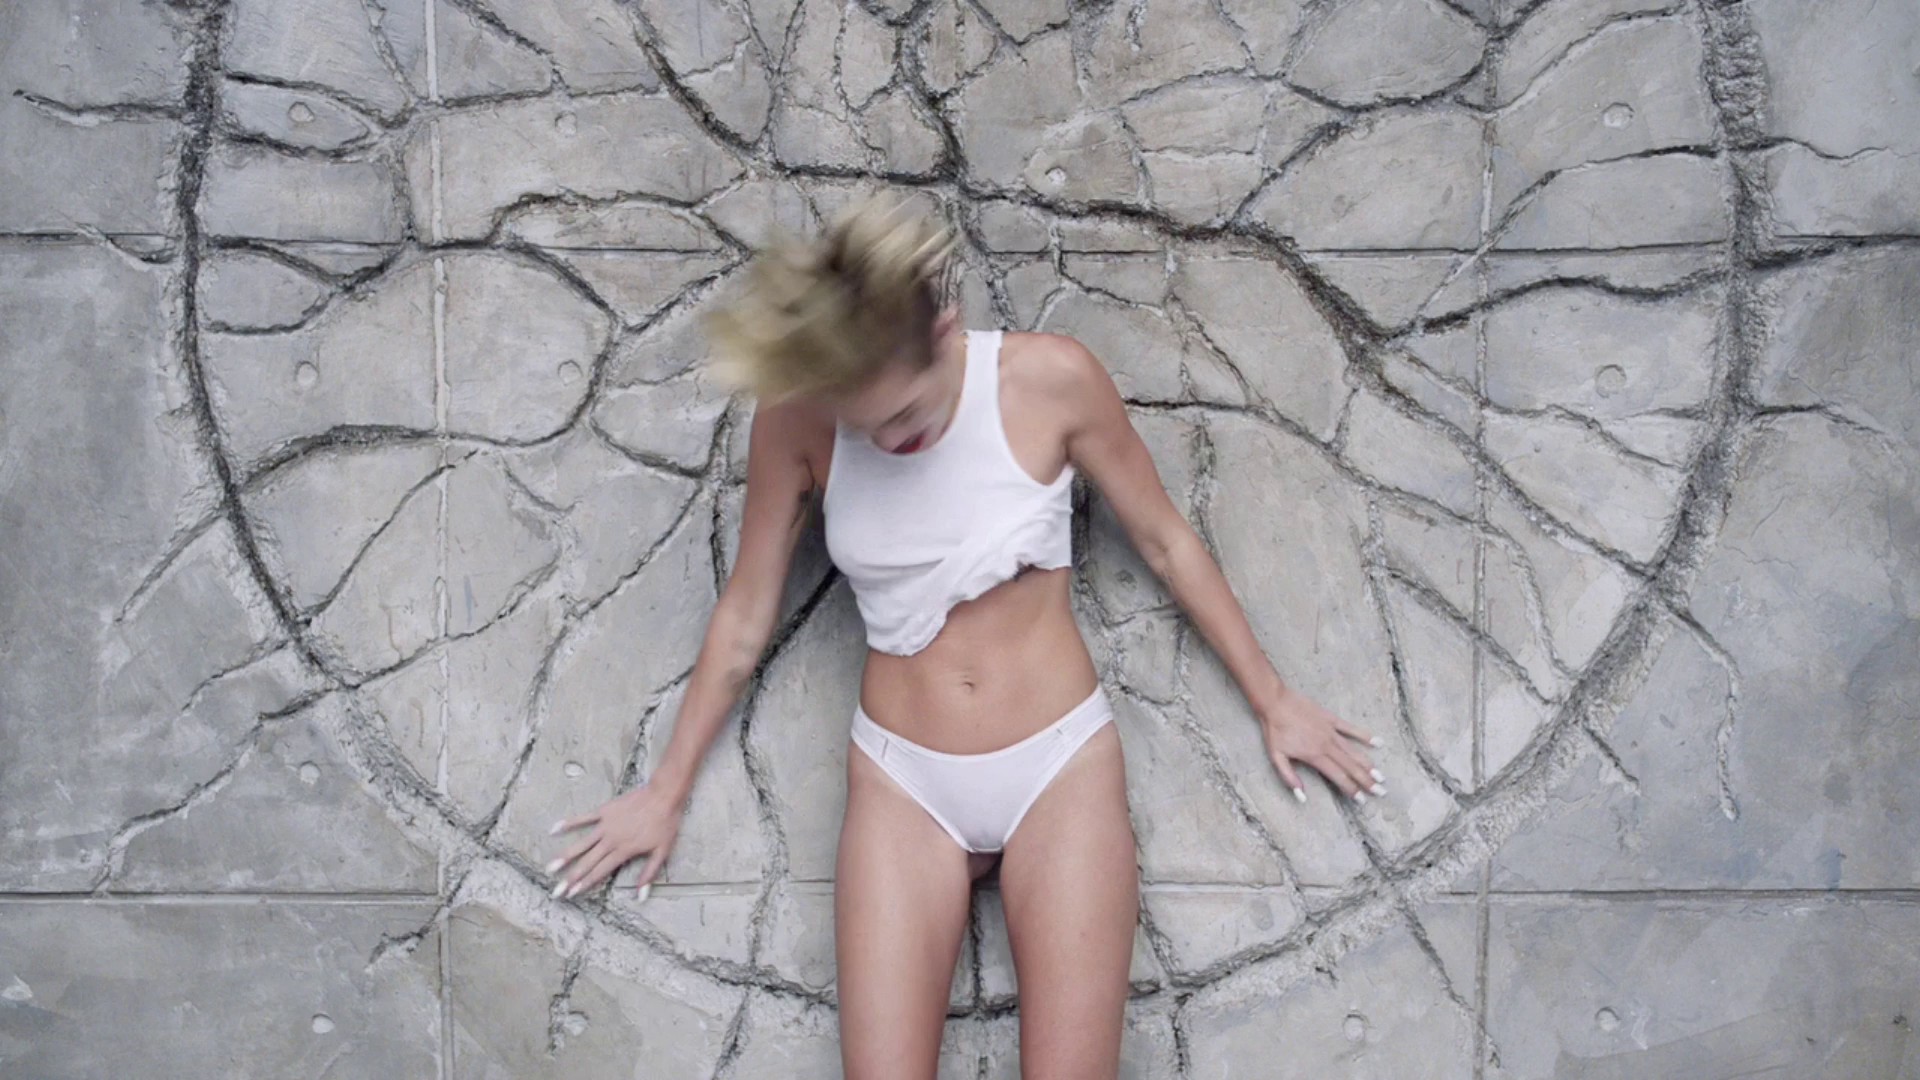 Miley Cyrus - Wrecking Ball explicit uncensored video 1080p4328.jpg